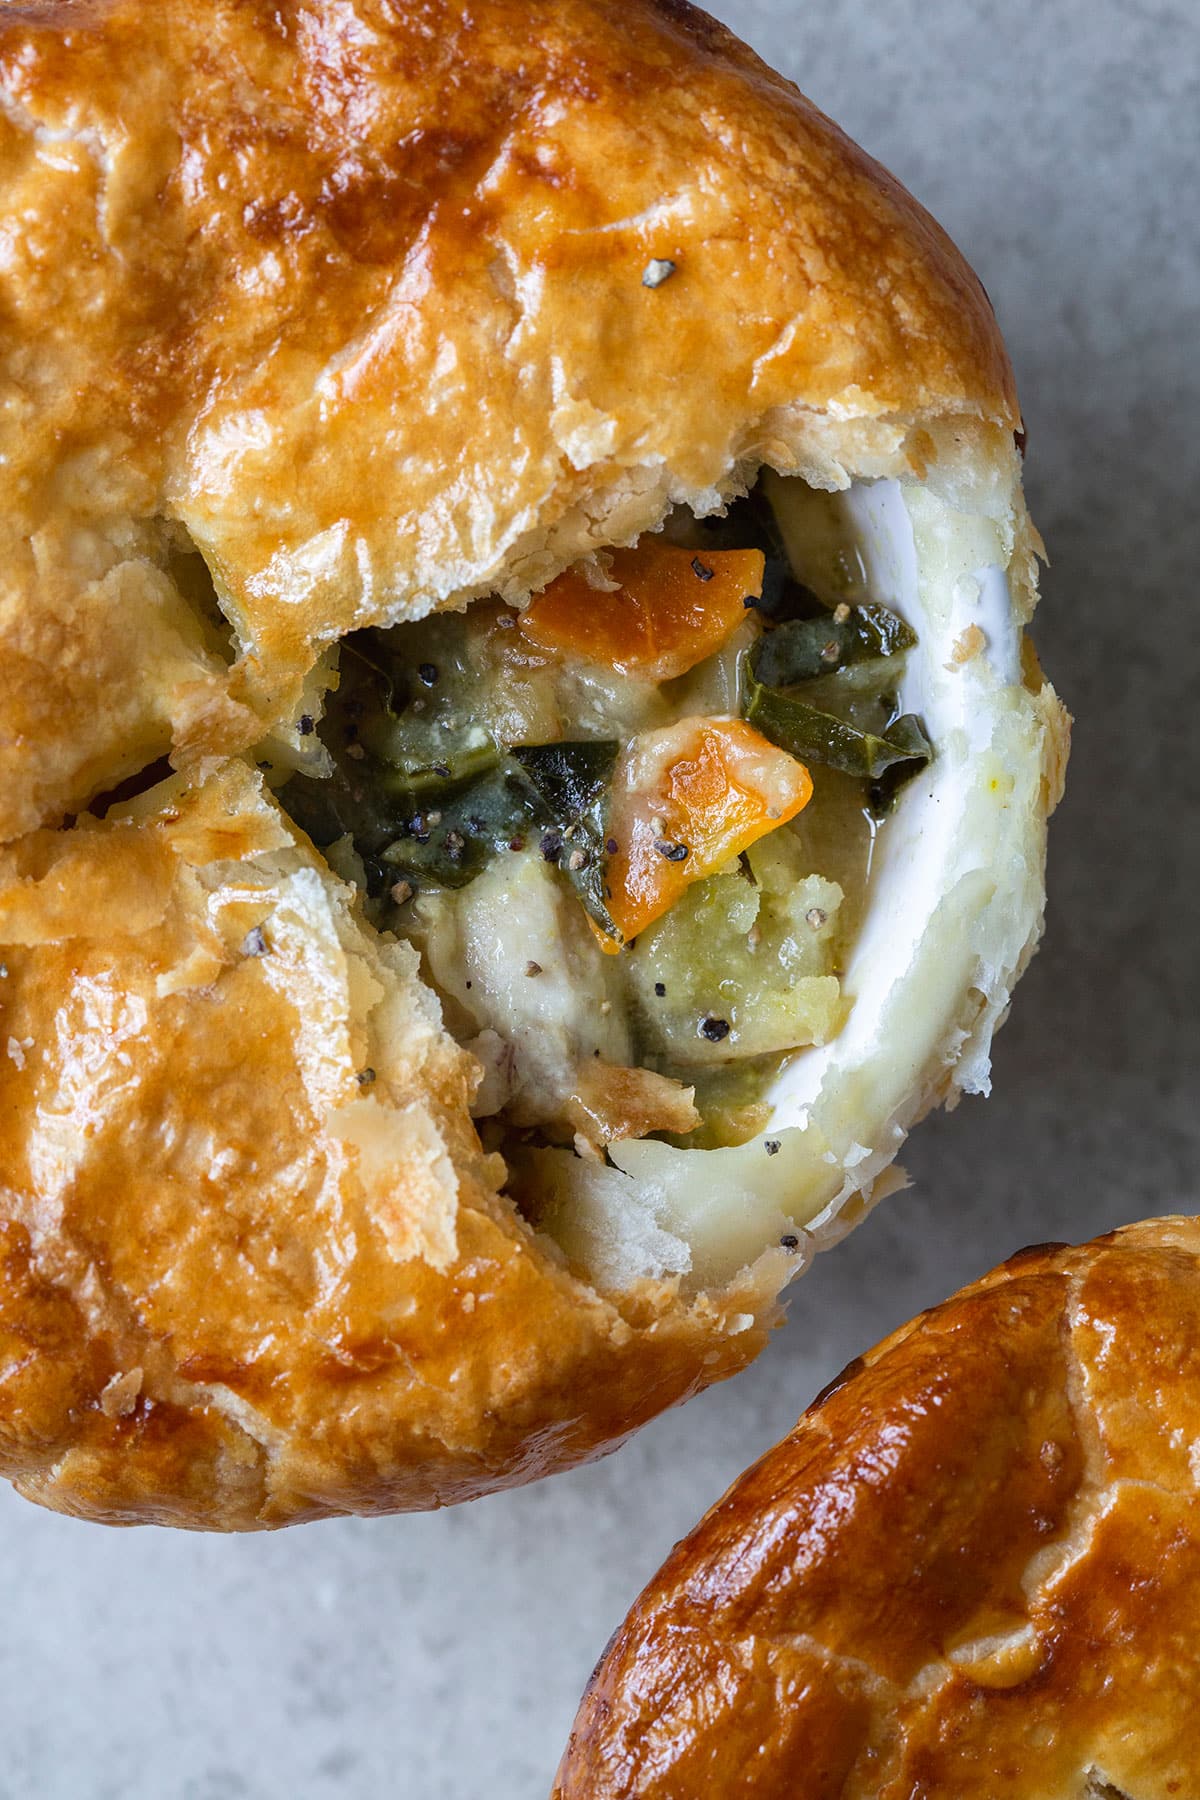 A top down shot of potpie revealing its inside filling consisting of chicken, carrots, and other vegetables. 